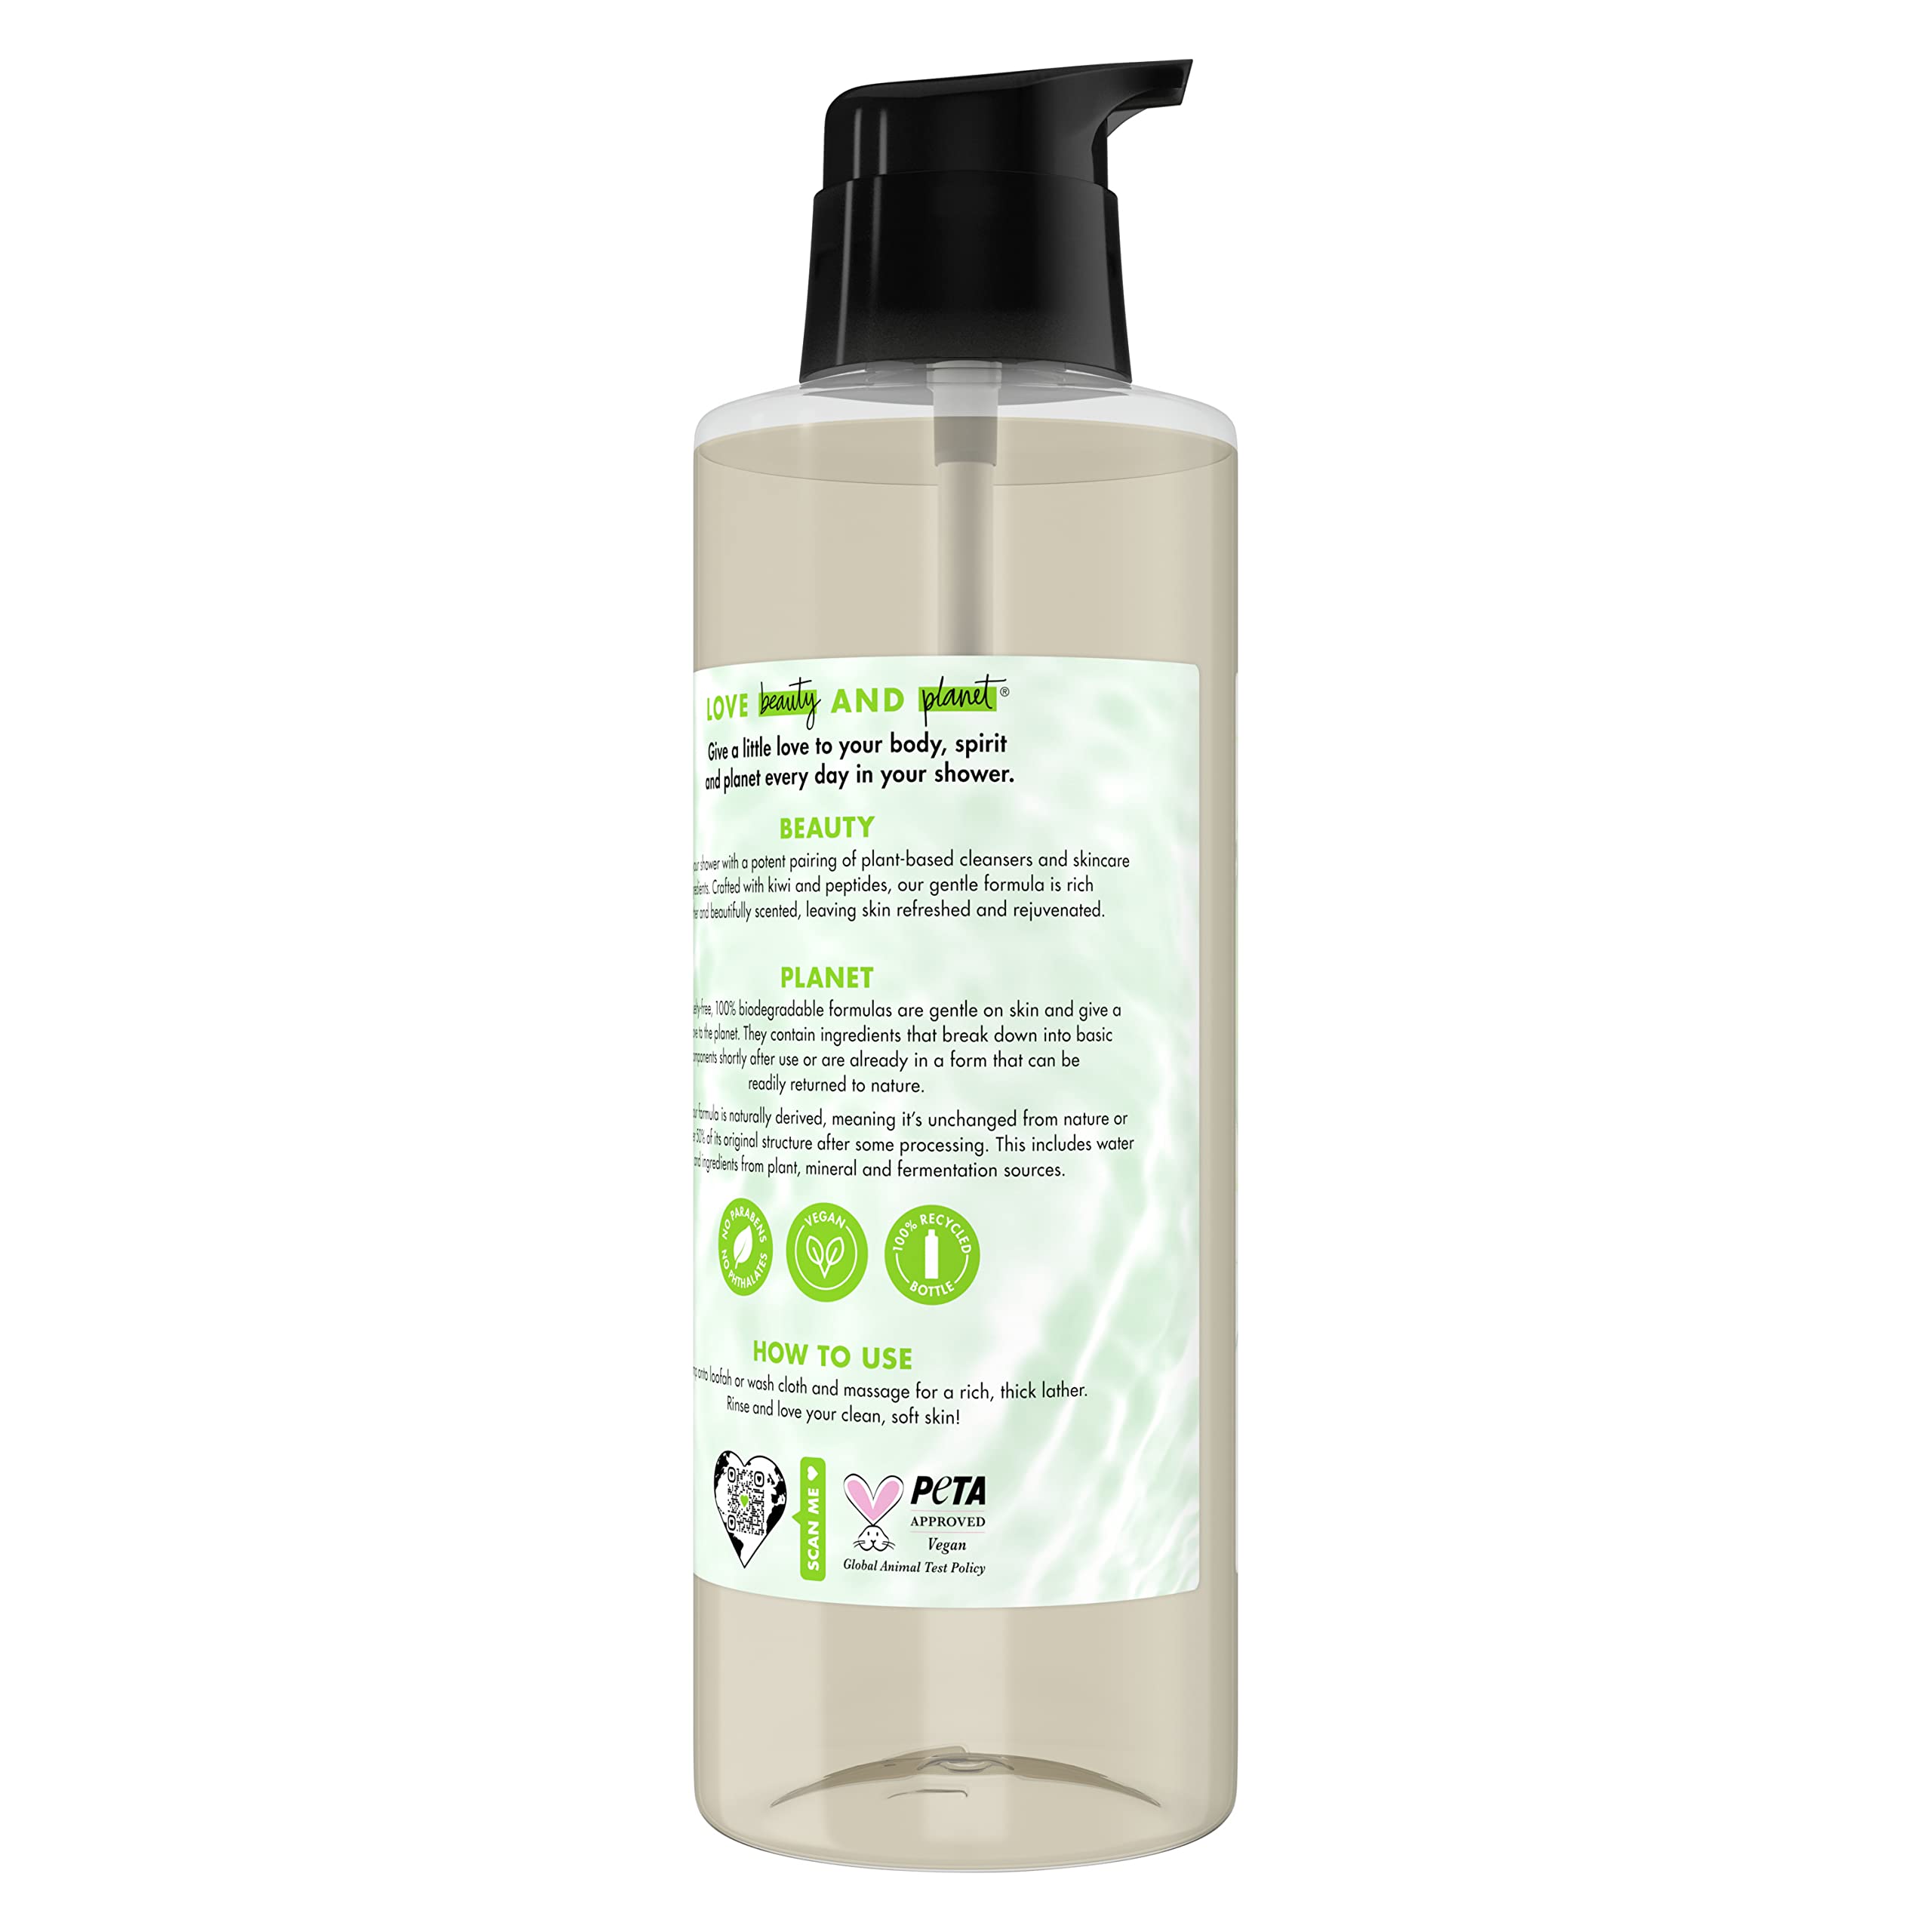 Love Beauty And Planet Body Wash Refresh and Rejuvenate, Kiwi and Peptides Made with Plant-Based Cleansers and Skin Care Ingredients 32.3 fl oz